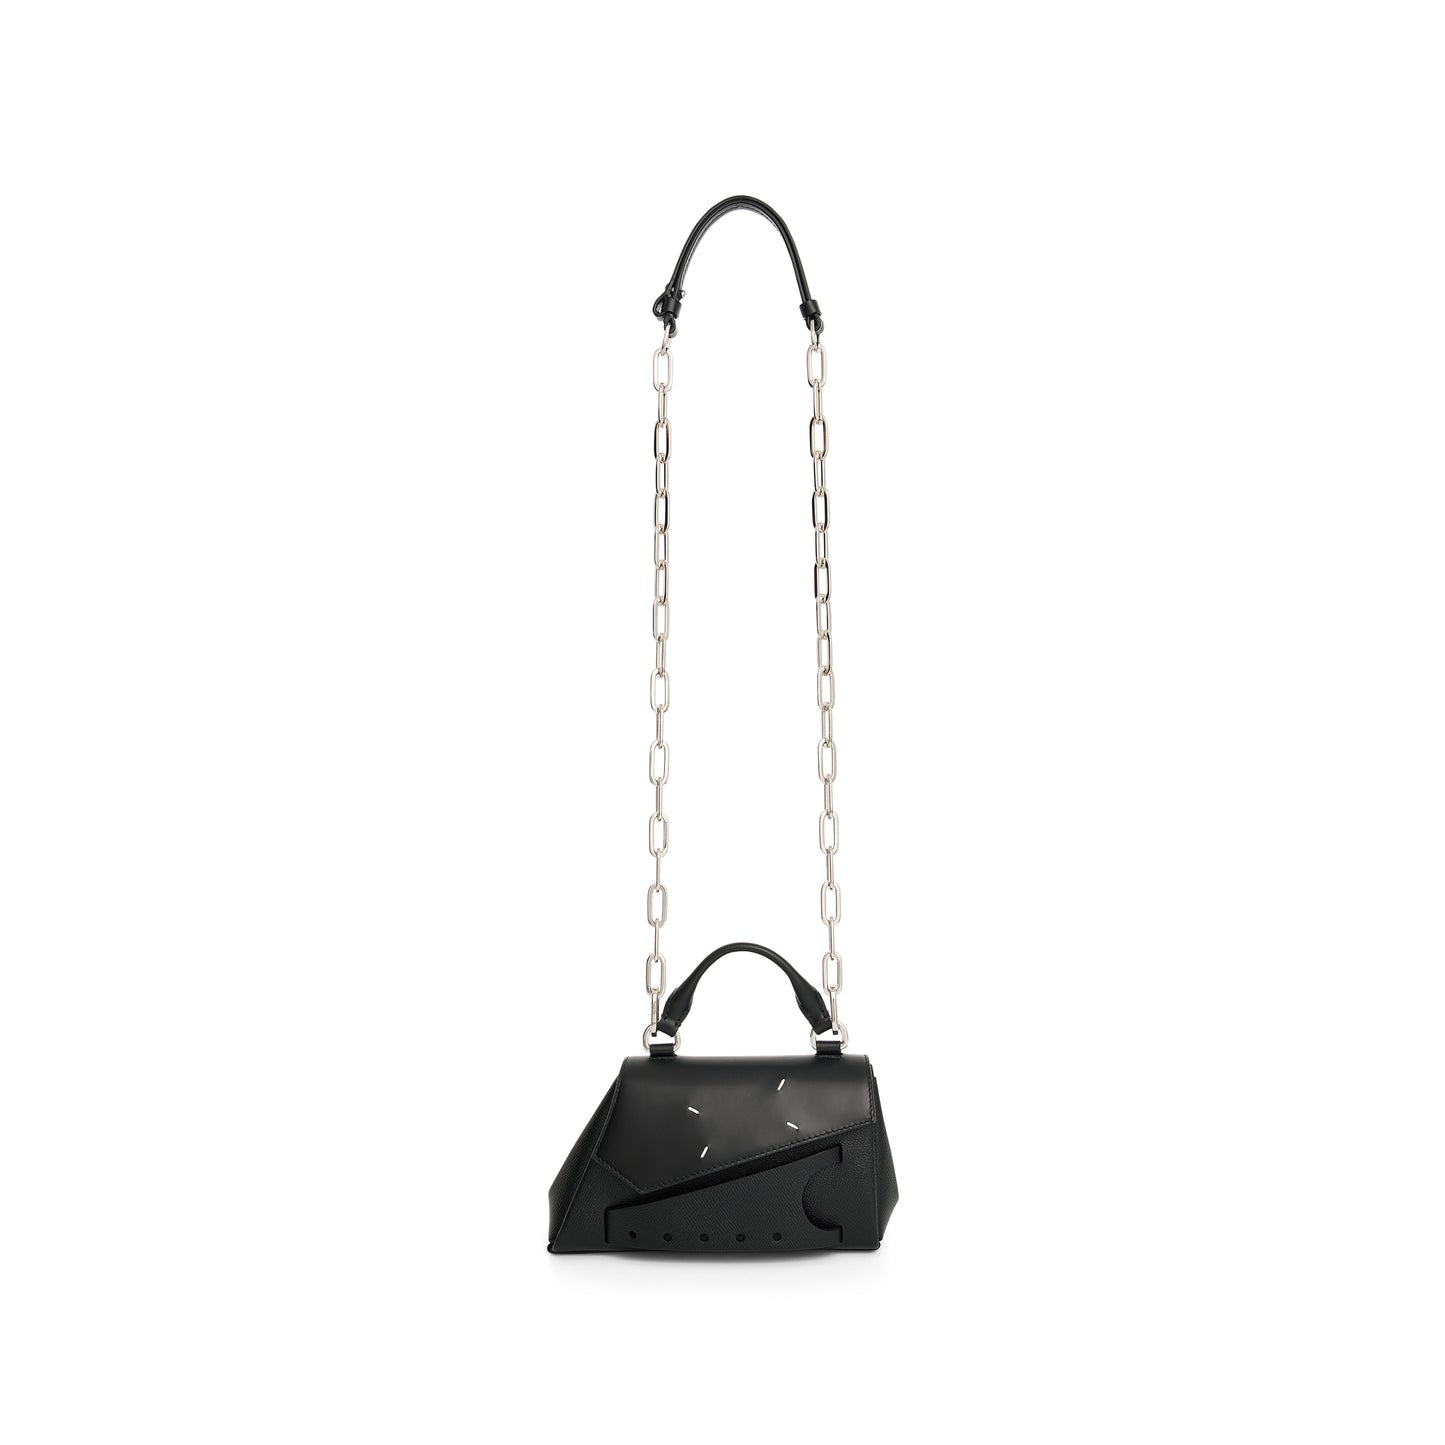 Micro Snatched Asymmetric Bag in Black